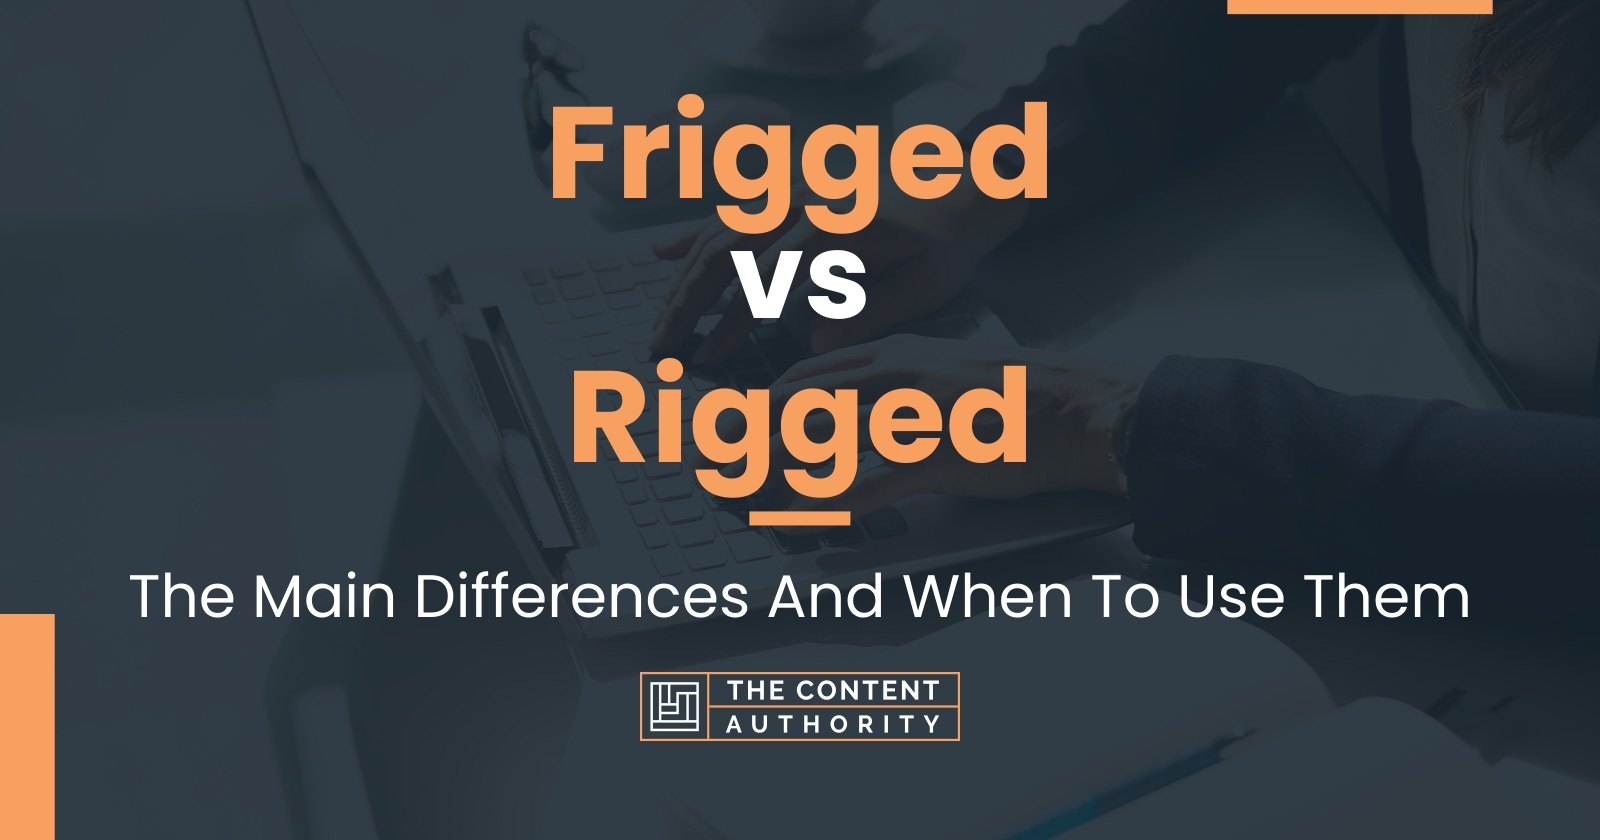 Frigged vs Rigged: The Main Differences And When To Use Them